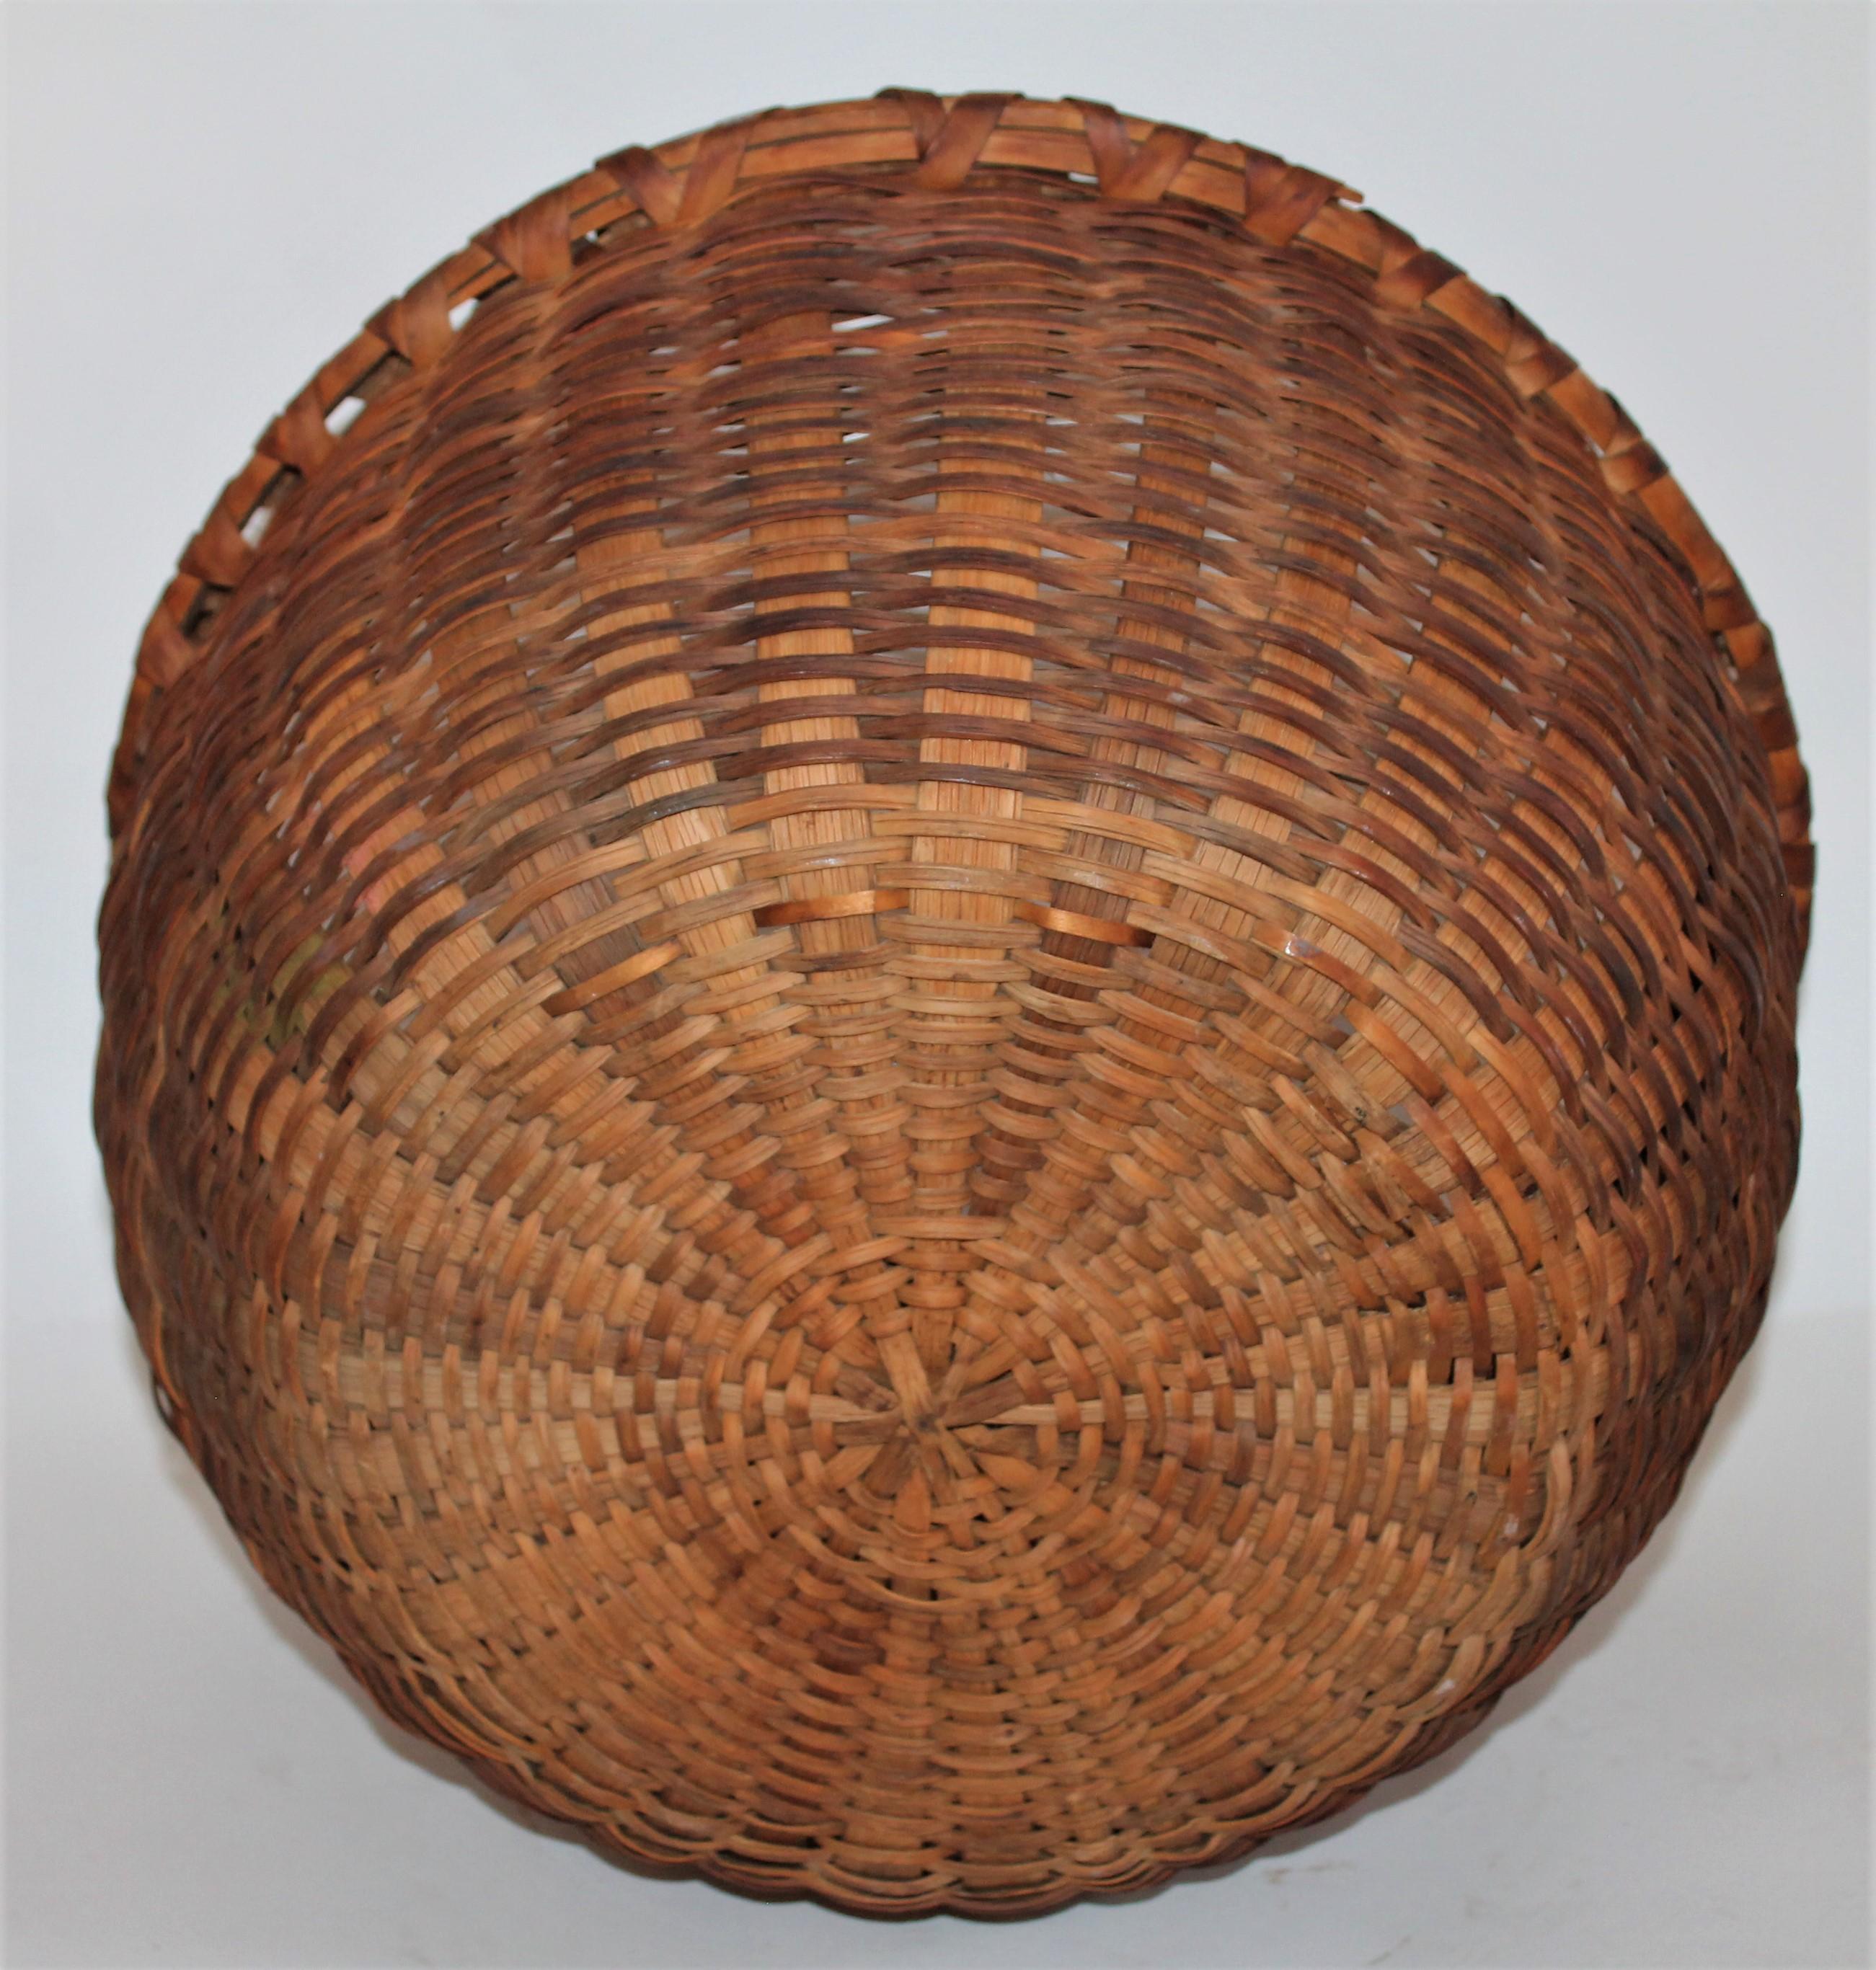 Hand-Crafted Shaker Style Swing Handle Basket